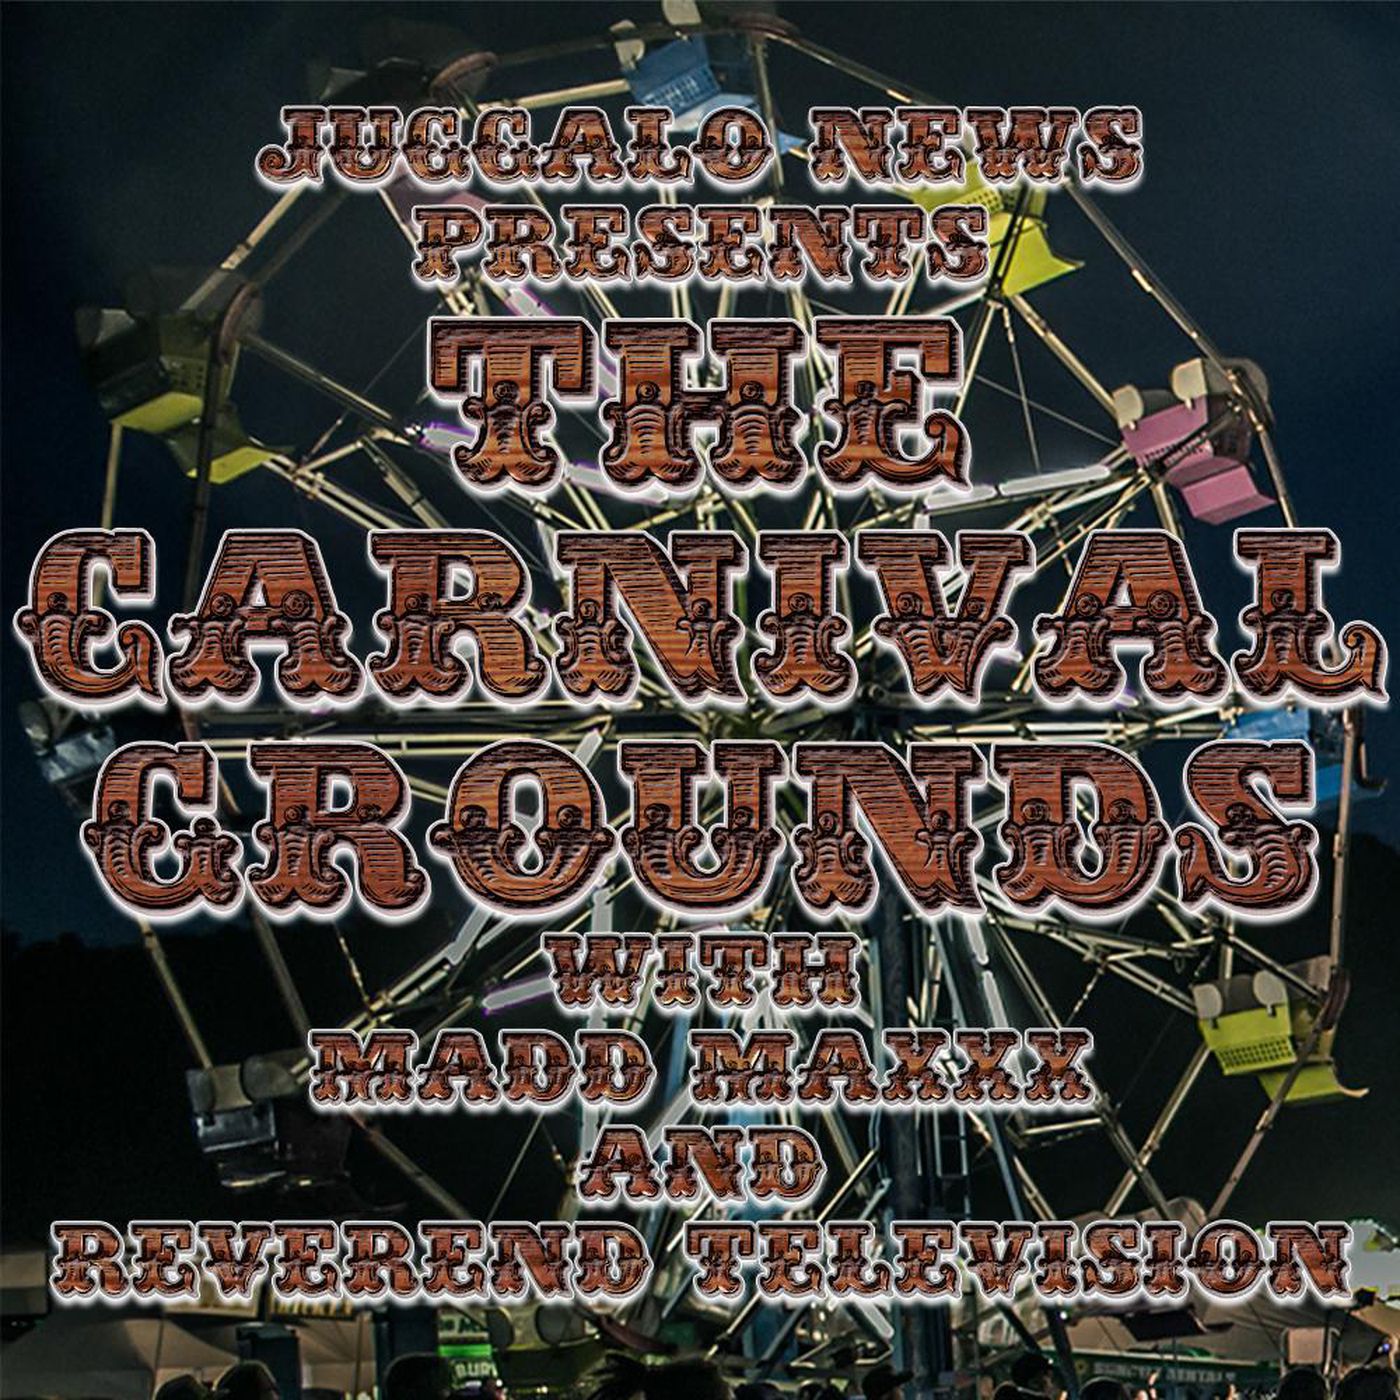 Juggalo News Presents: The Carnival Grounds with Madd Maxxx and Reverend Television